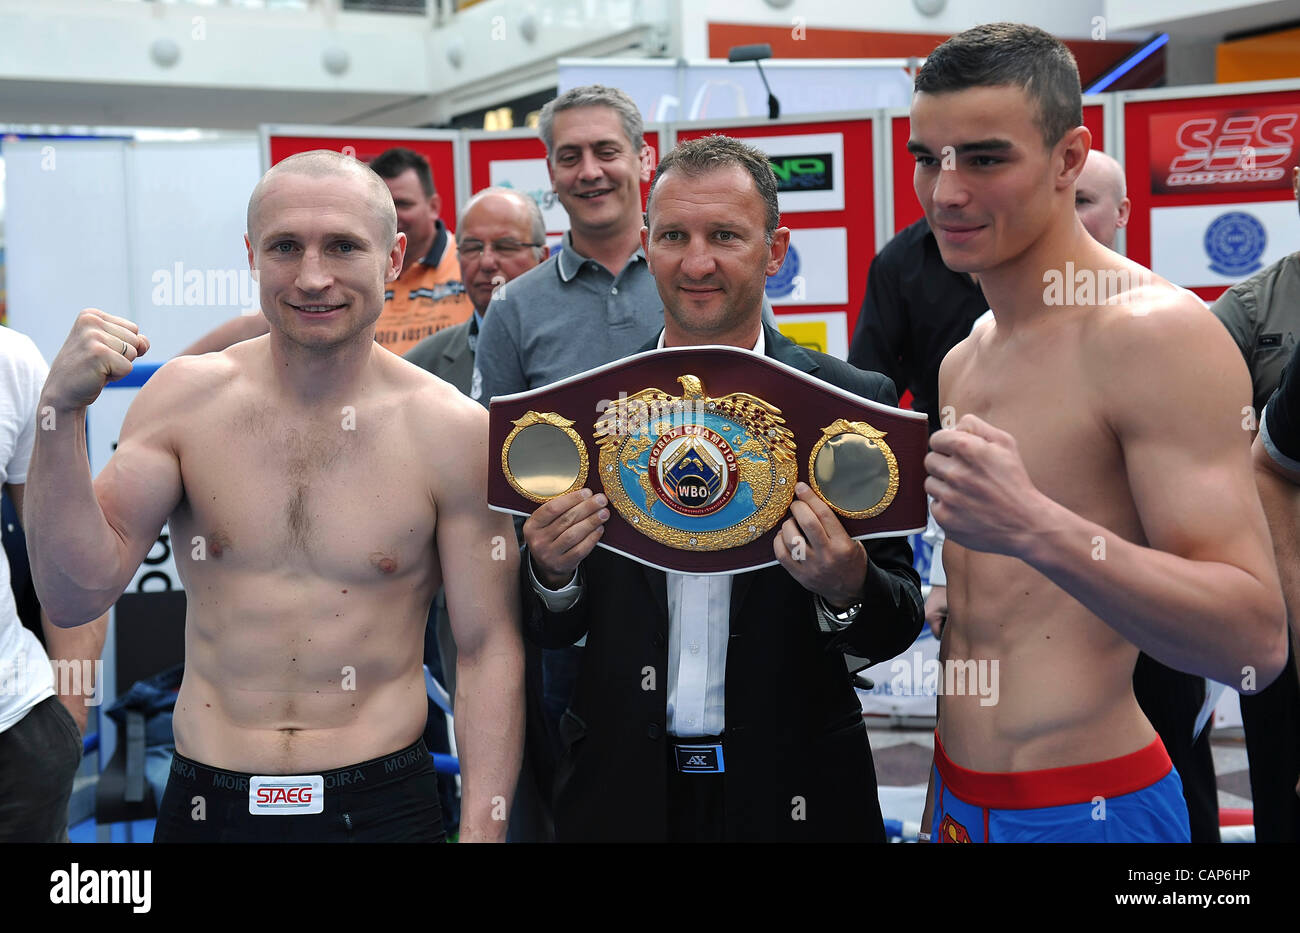 Boxer Lukas Konecny (CZE, left) and Salim Larbi (FRA) pose during the official Weight-In ahead of Interim WBO Light Middleweight Championship Title in Brno Modrice, Czech Republic on April 4, 2012. (CTK Photo/Igor Sefr) Stock Photo